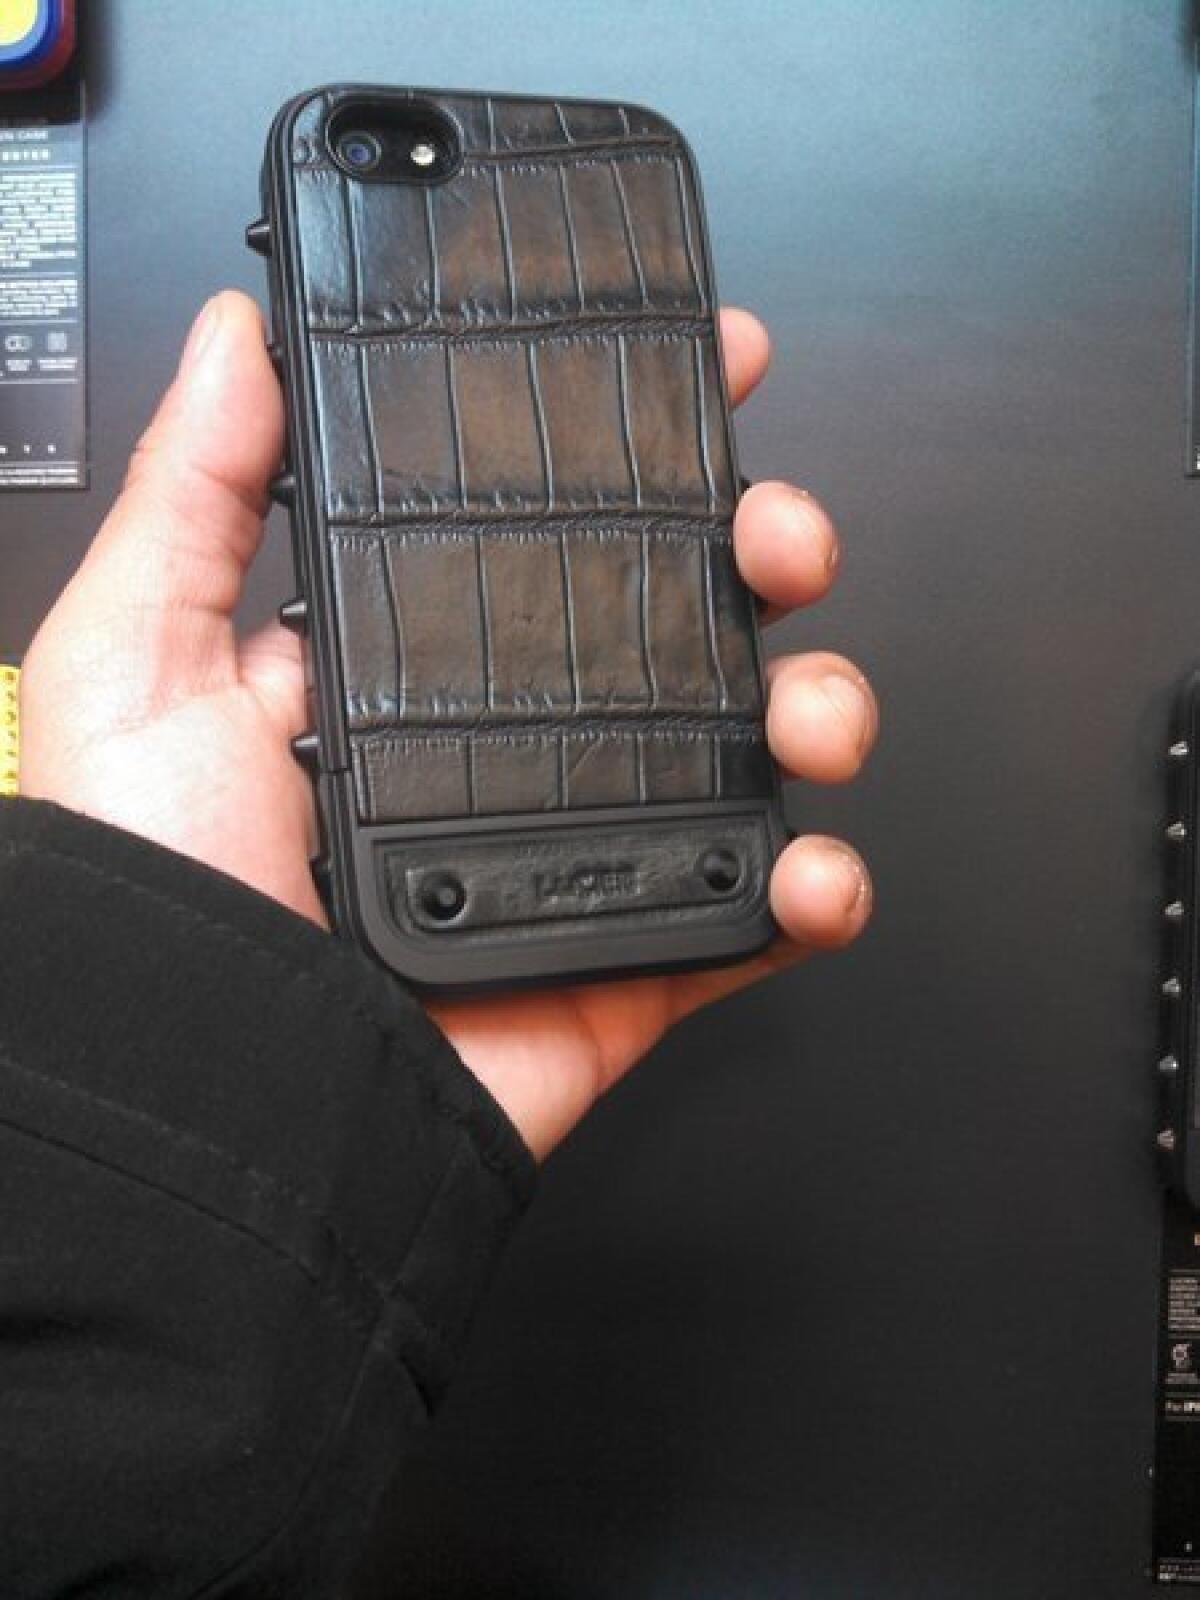 Lucien Elements' $650 crocodile-skin iPhone 5 case was among the most expensive smartphone cases at CES.